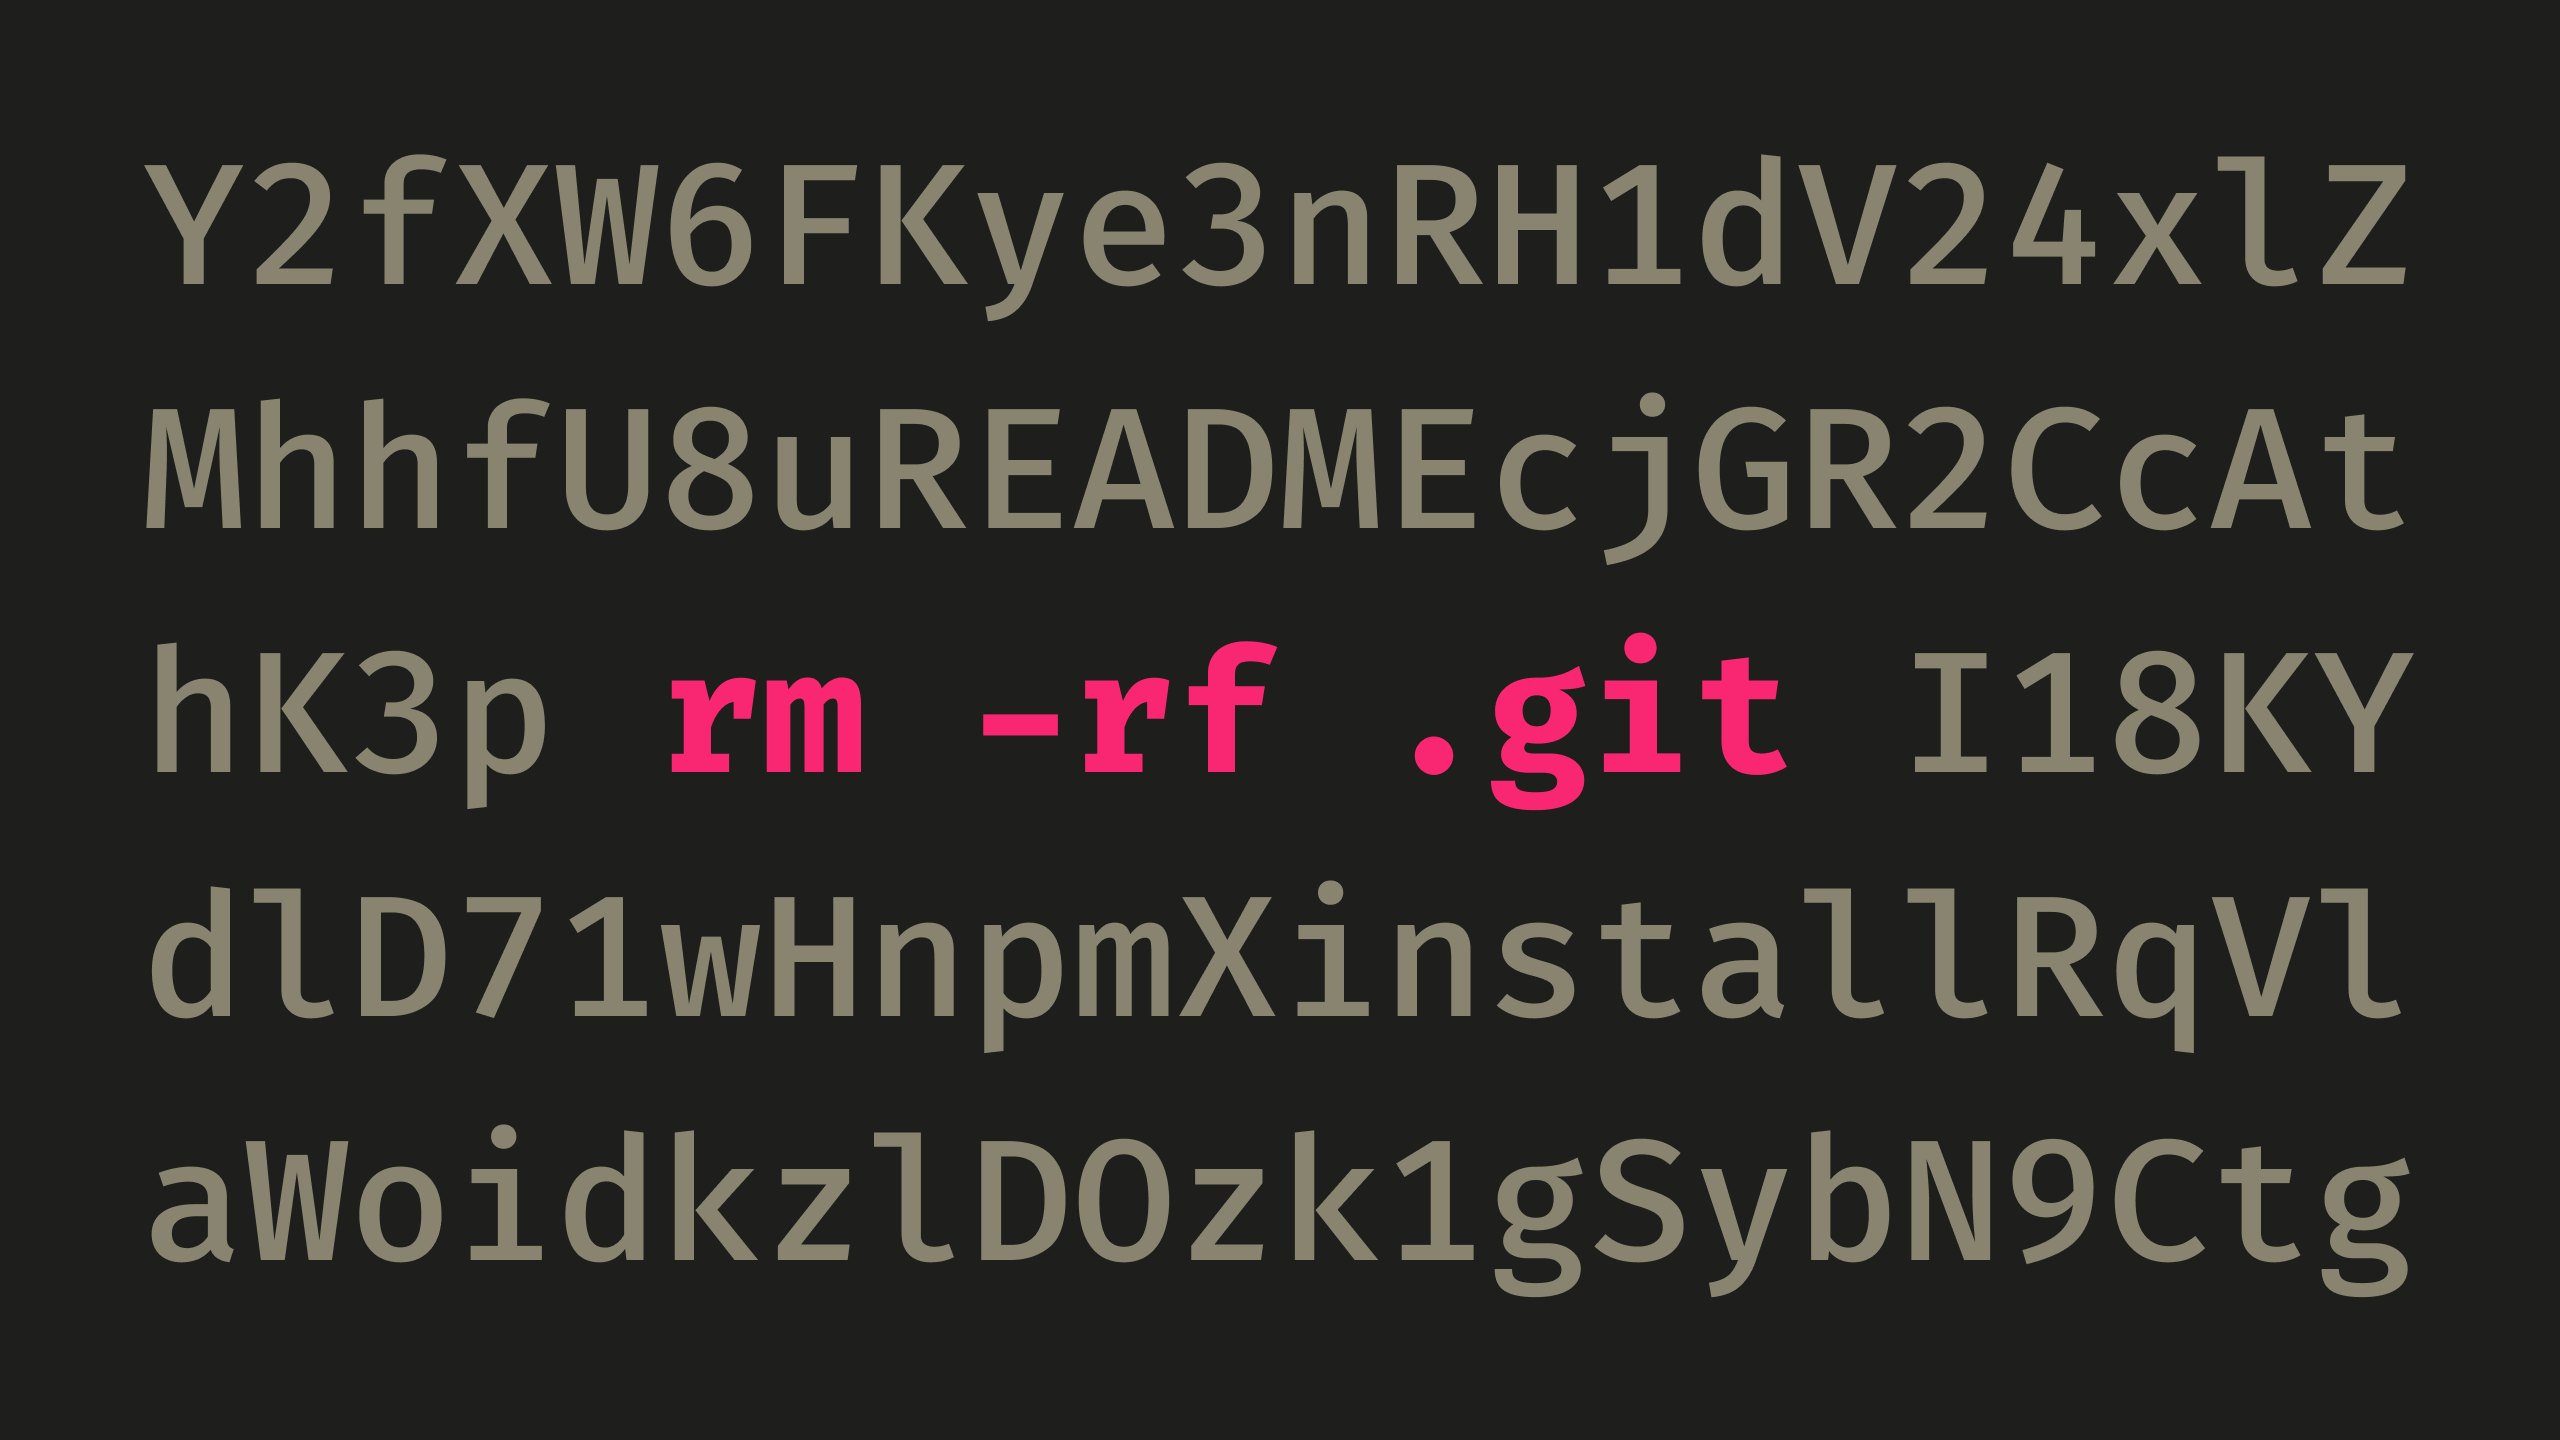 Terminal command "rm -rf .git", surrounded by random characters.